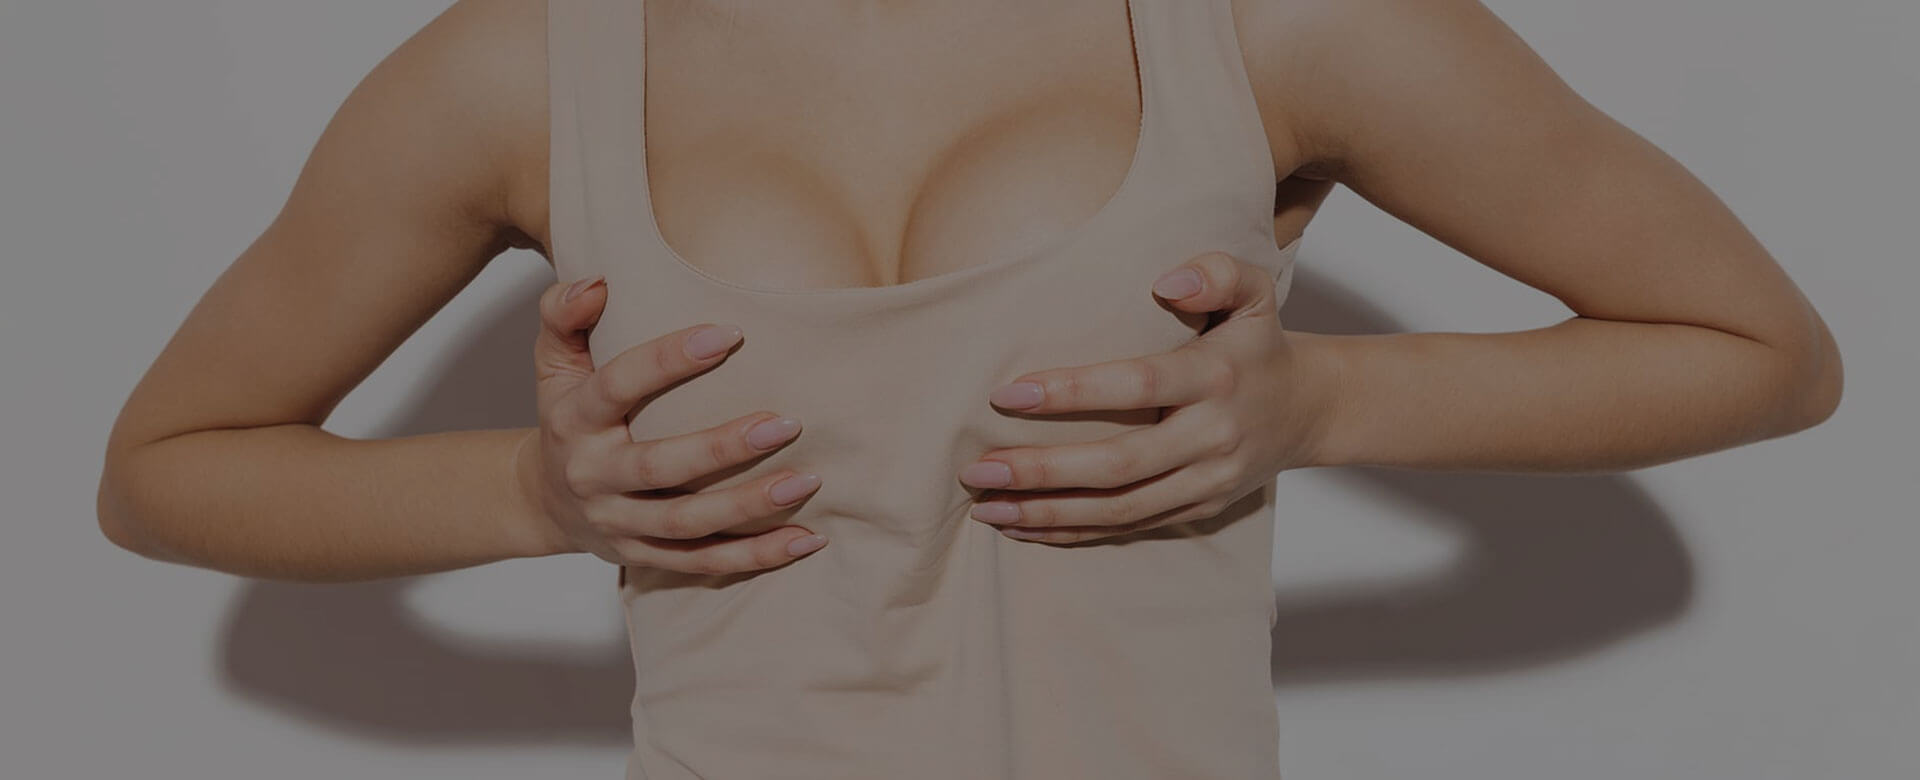 Breast augmentation: the plus of adipose-derived stem cells-based lipofilling